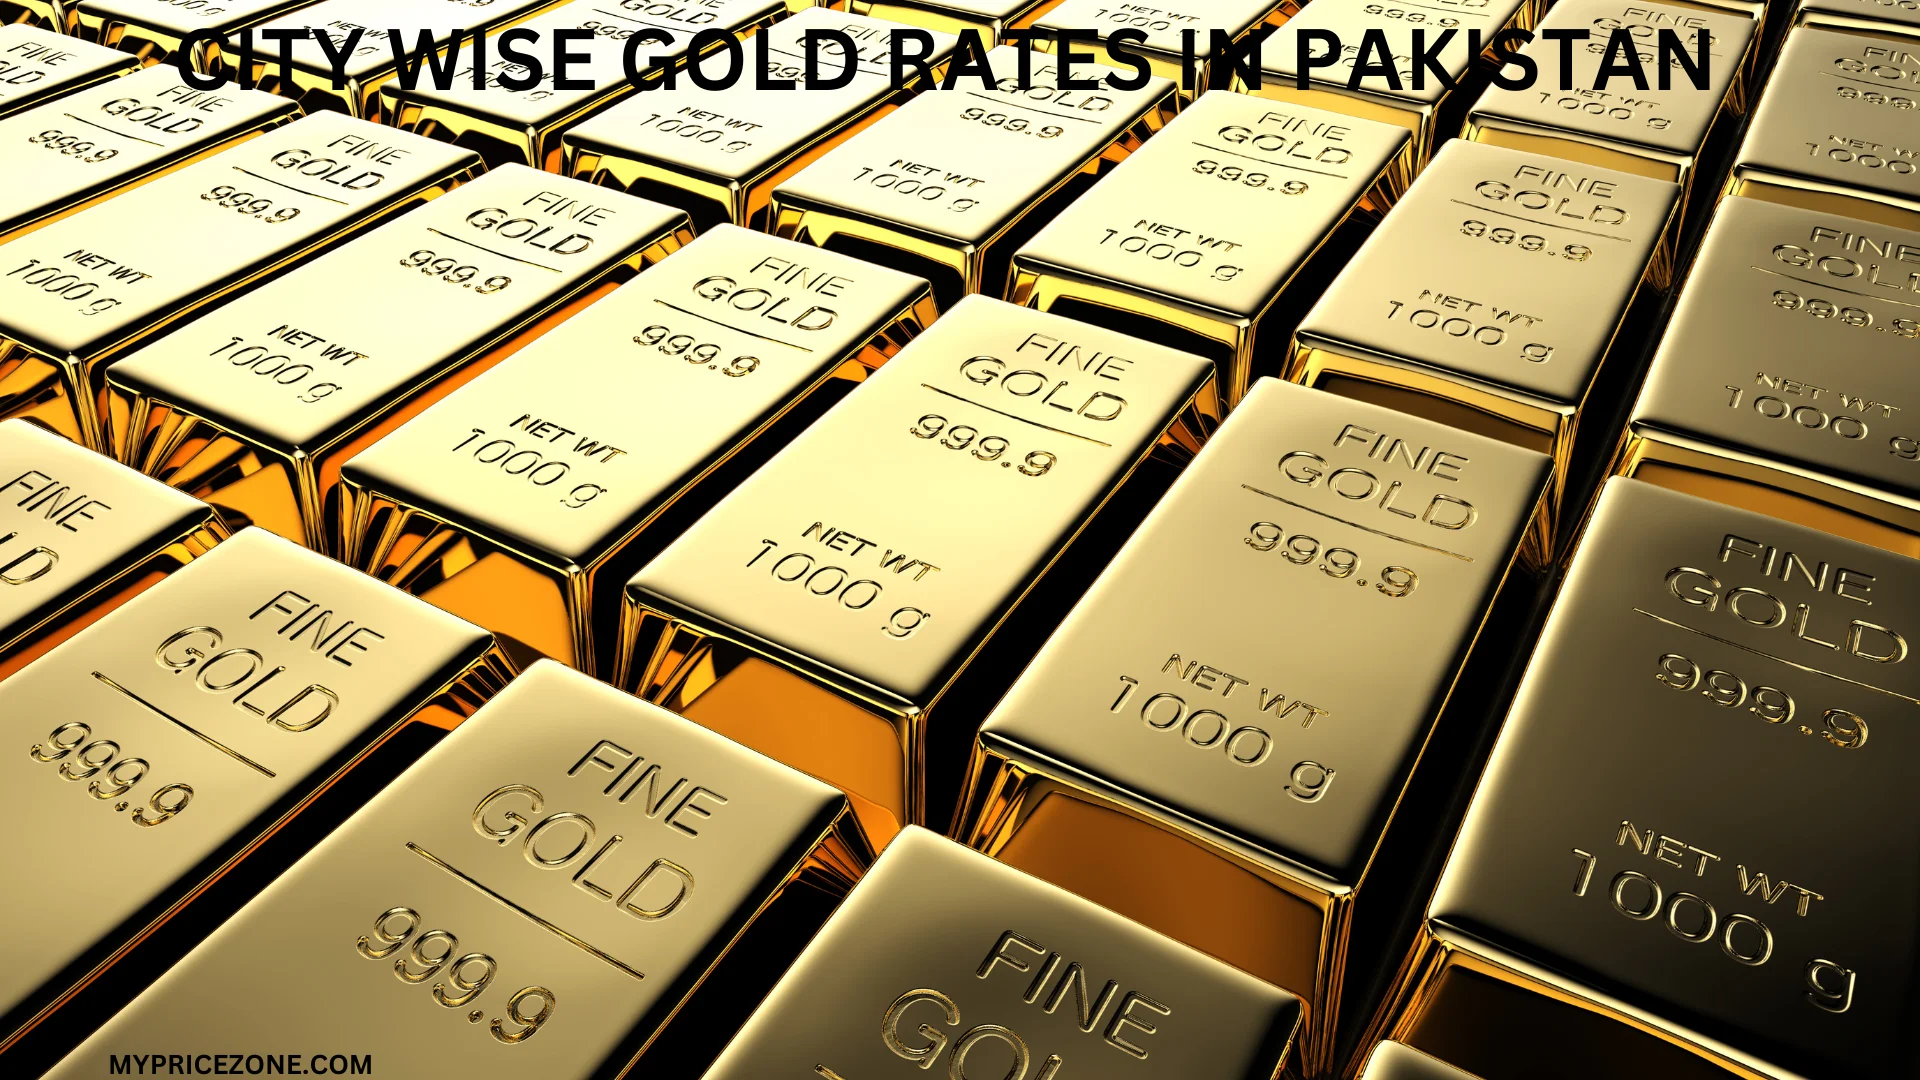 GOLD BARS WITH CITY WISE GOLD RATES IN PAKISTAN